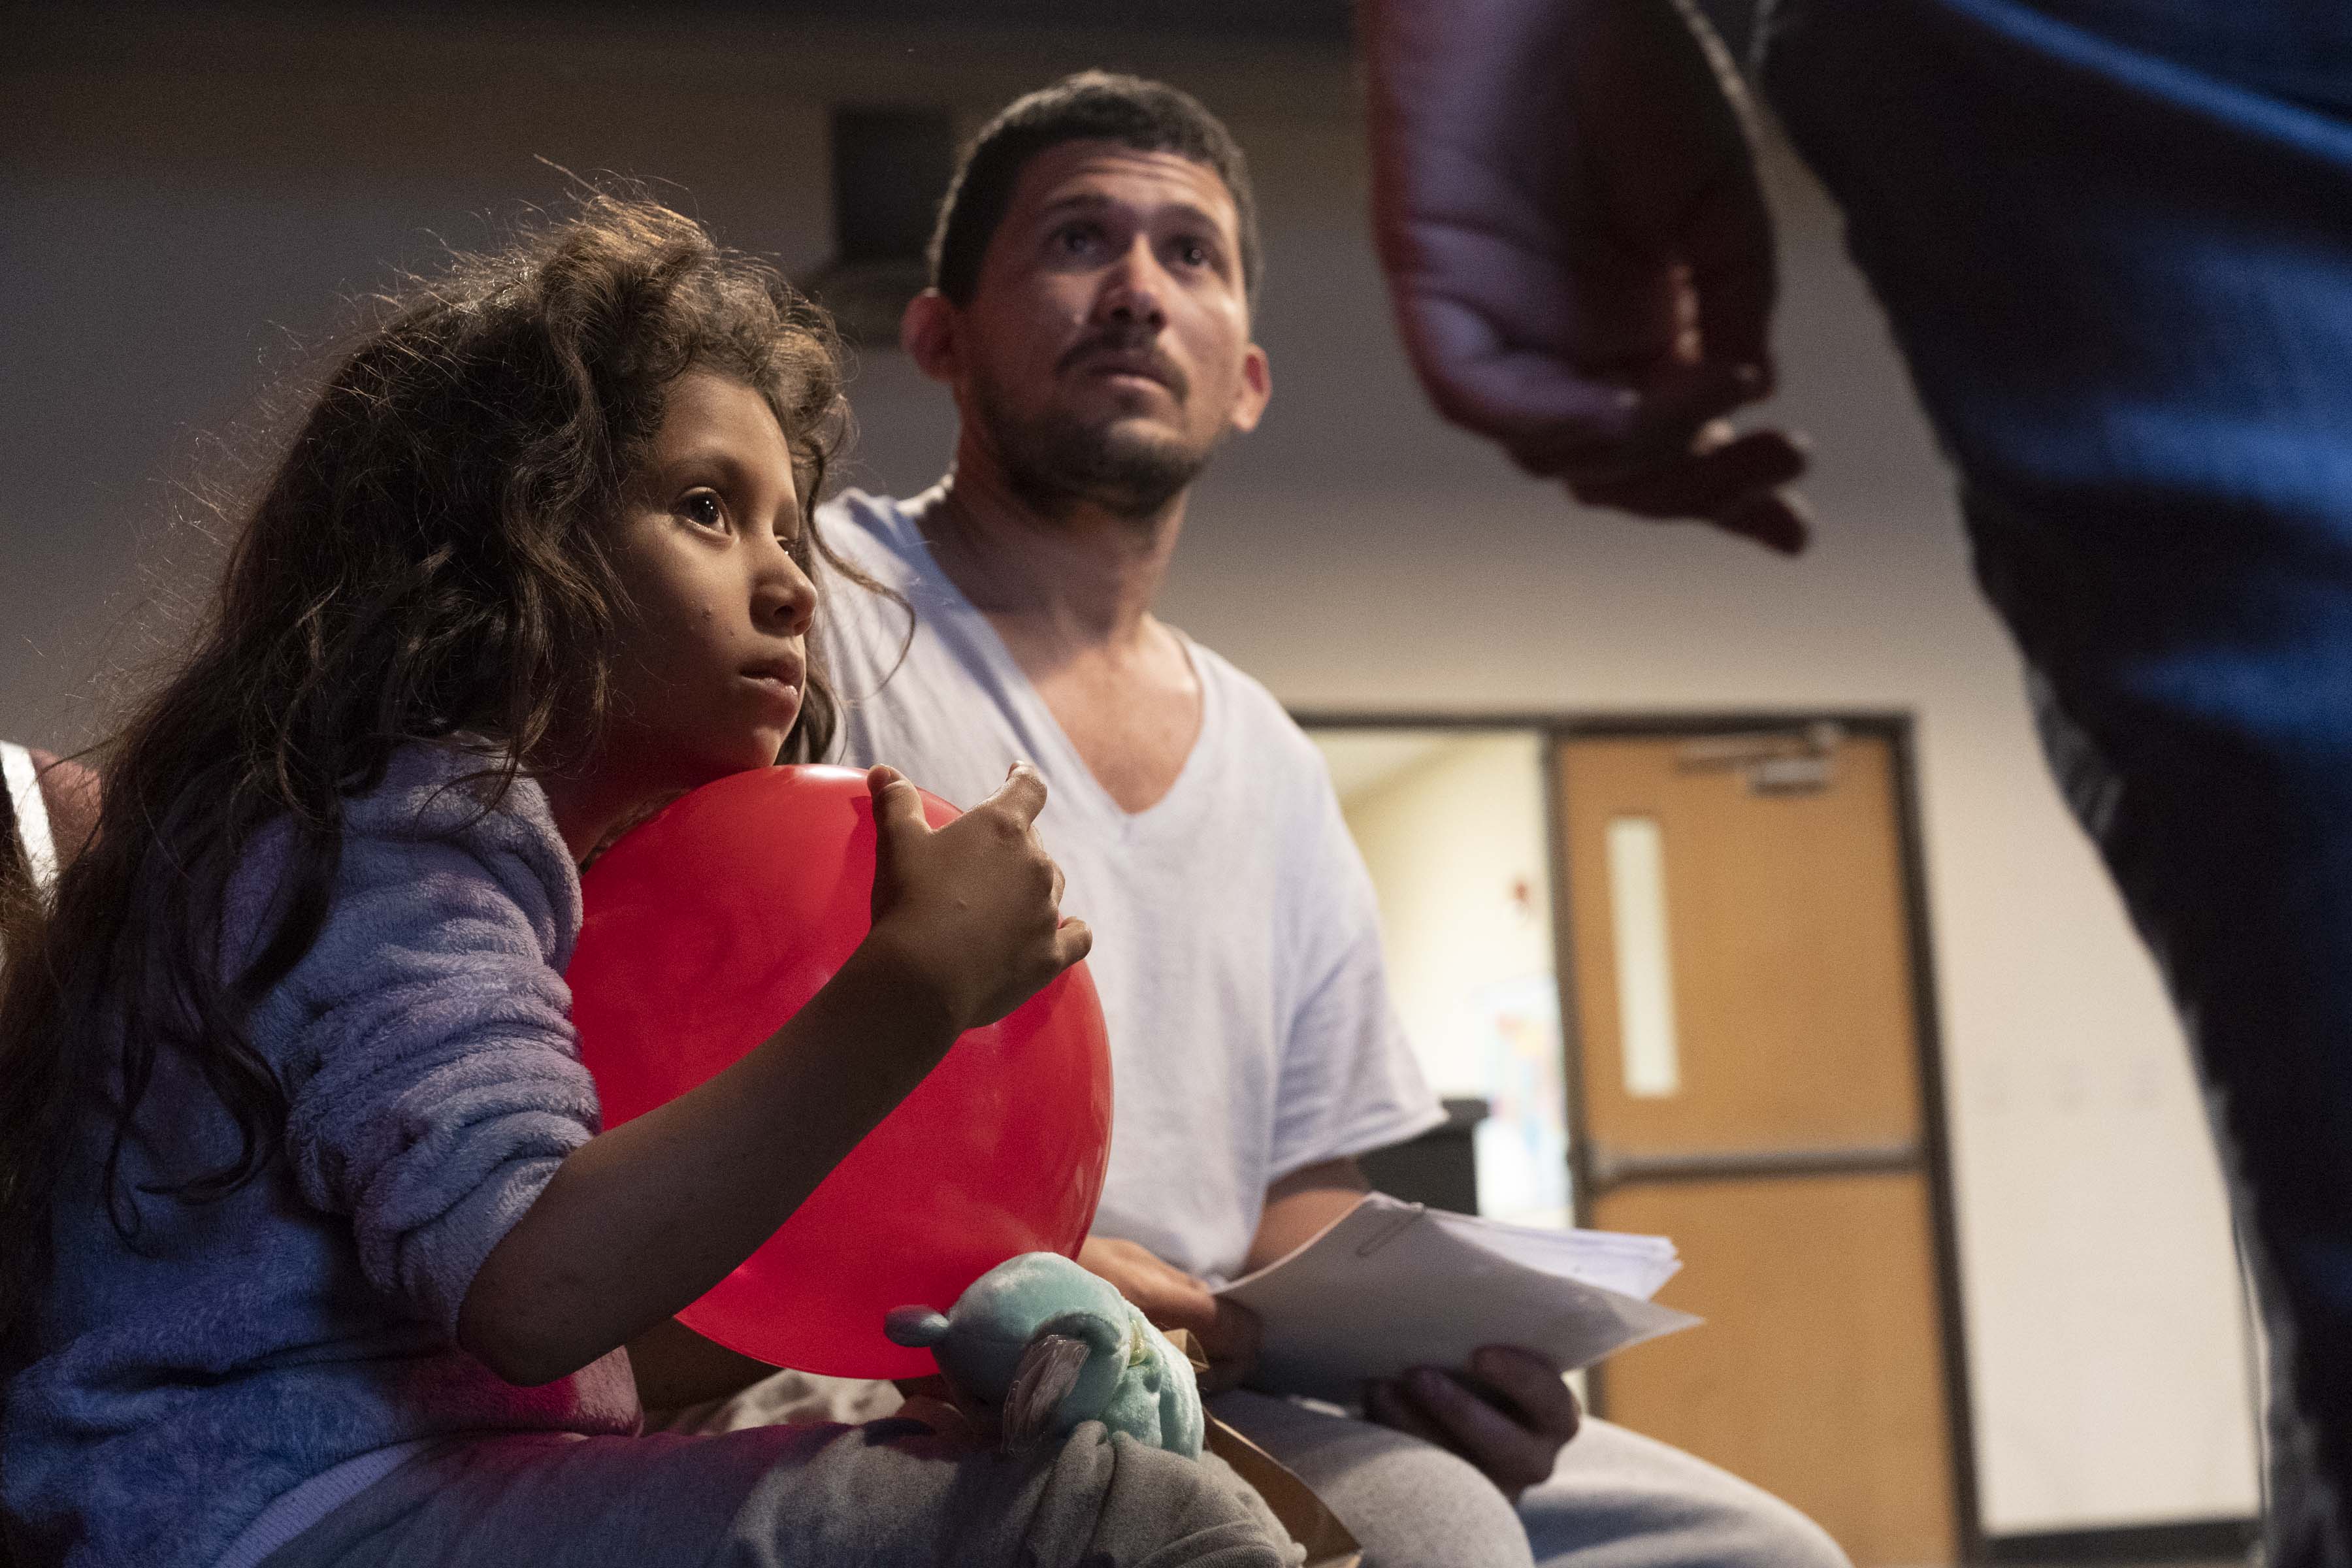 Guatemalan father Marvin Cano, 28, with his daughter Maricela Cano, 7, consults with a medical worker about a skin irritation.